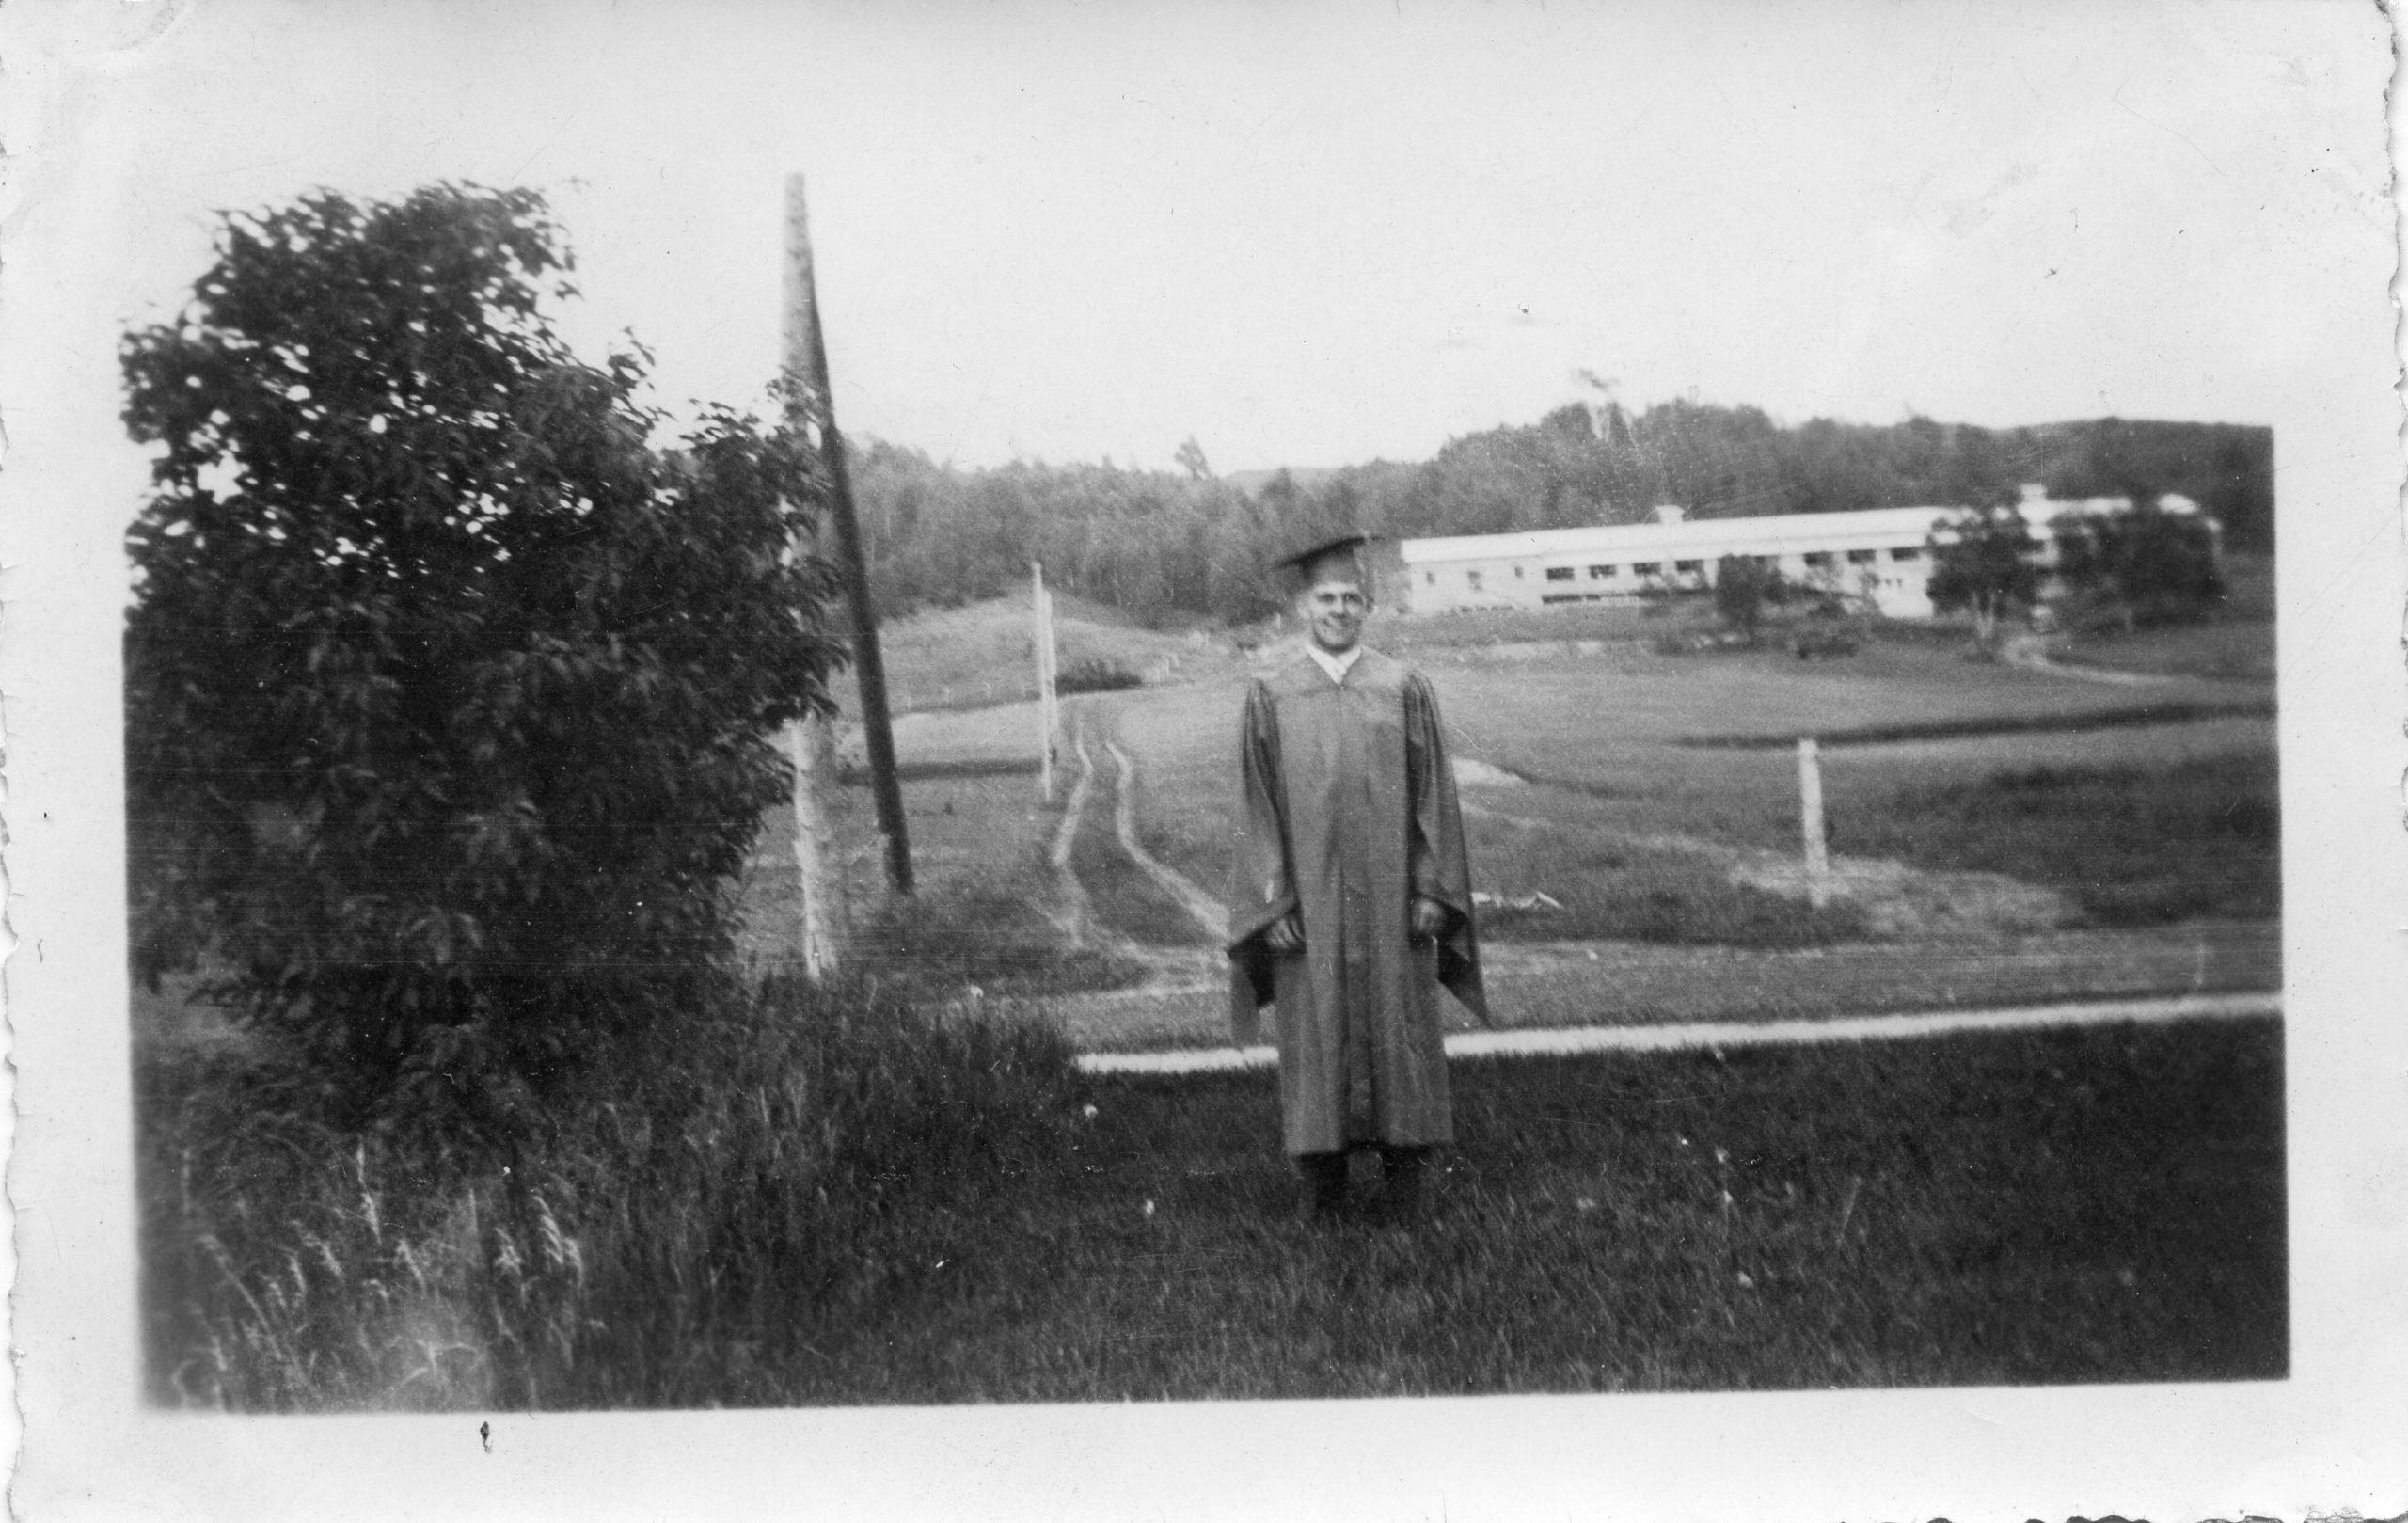 Robert Peacock in a graduation cap and gown, in front of a rural scene.